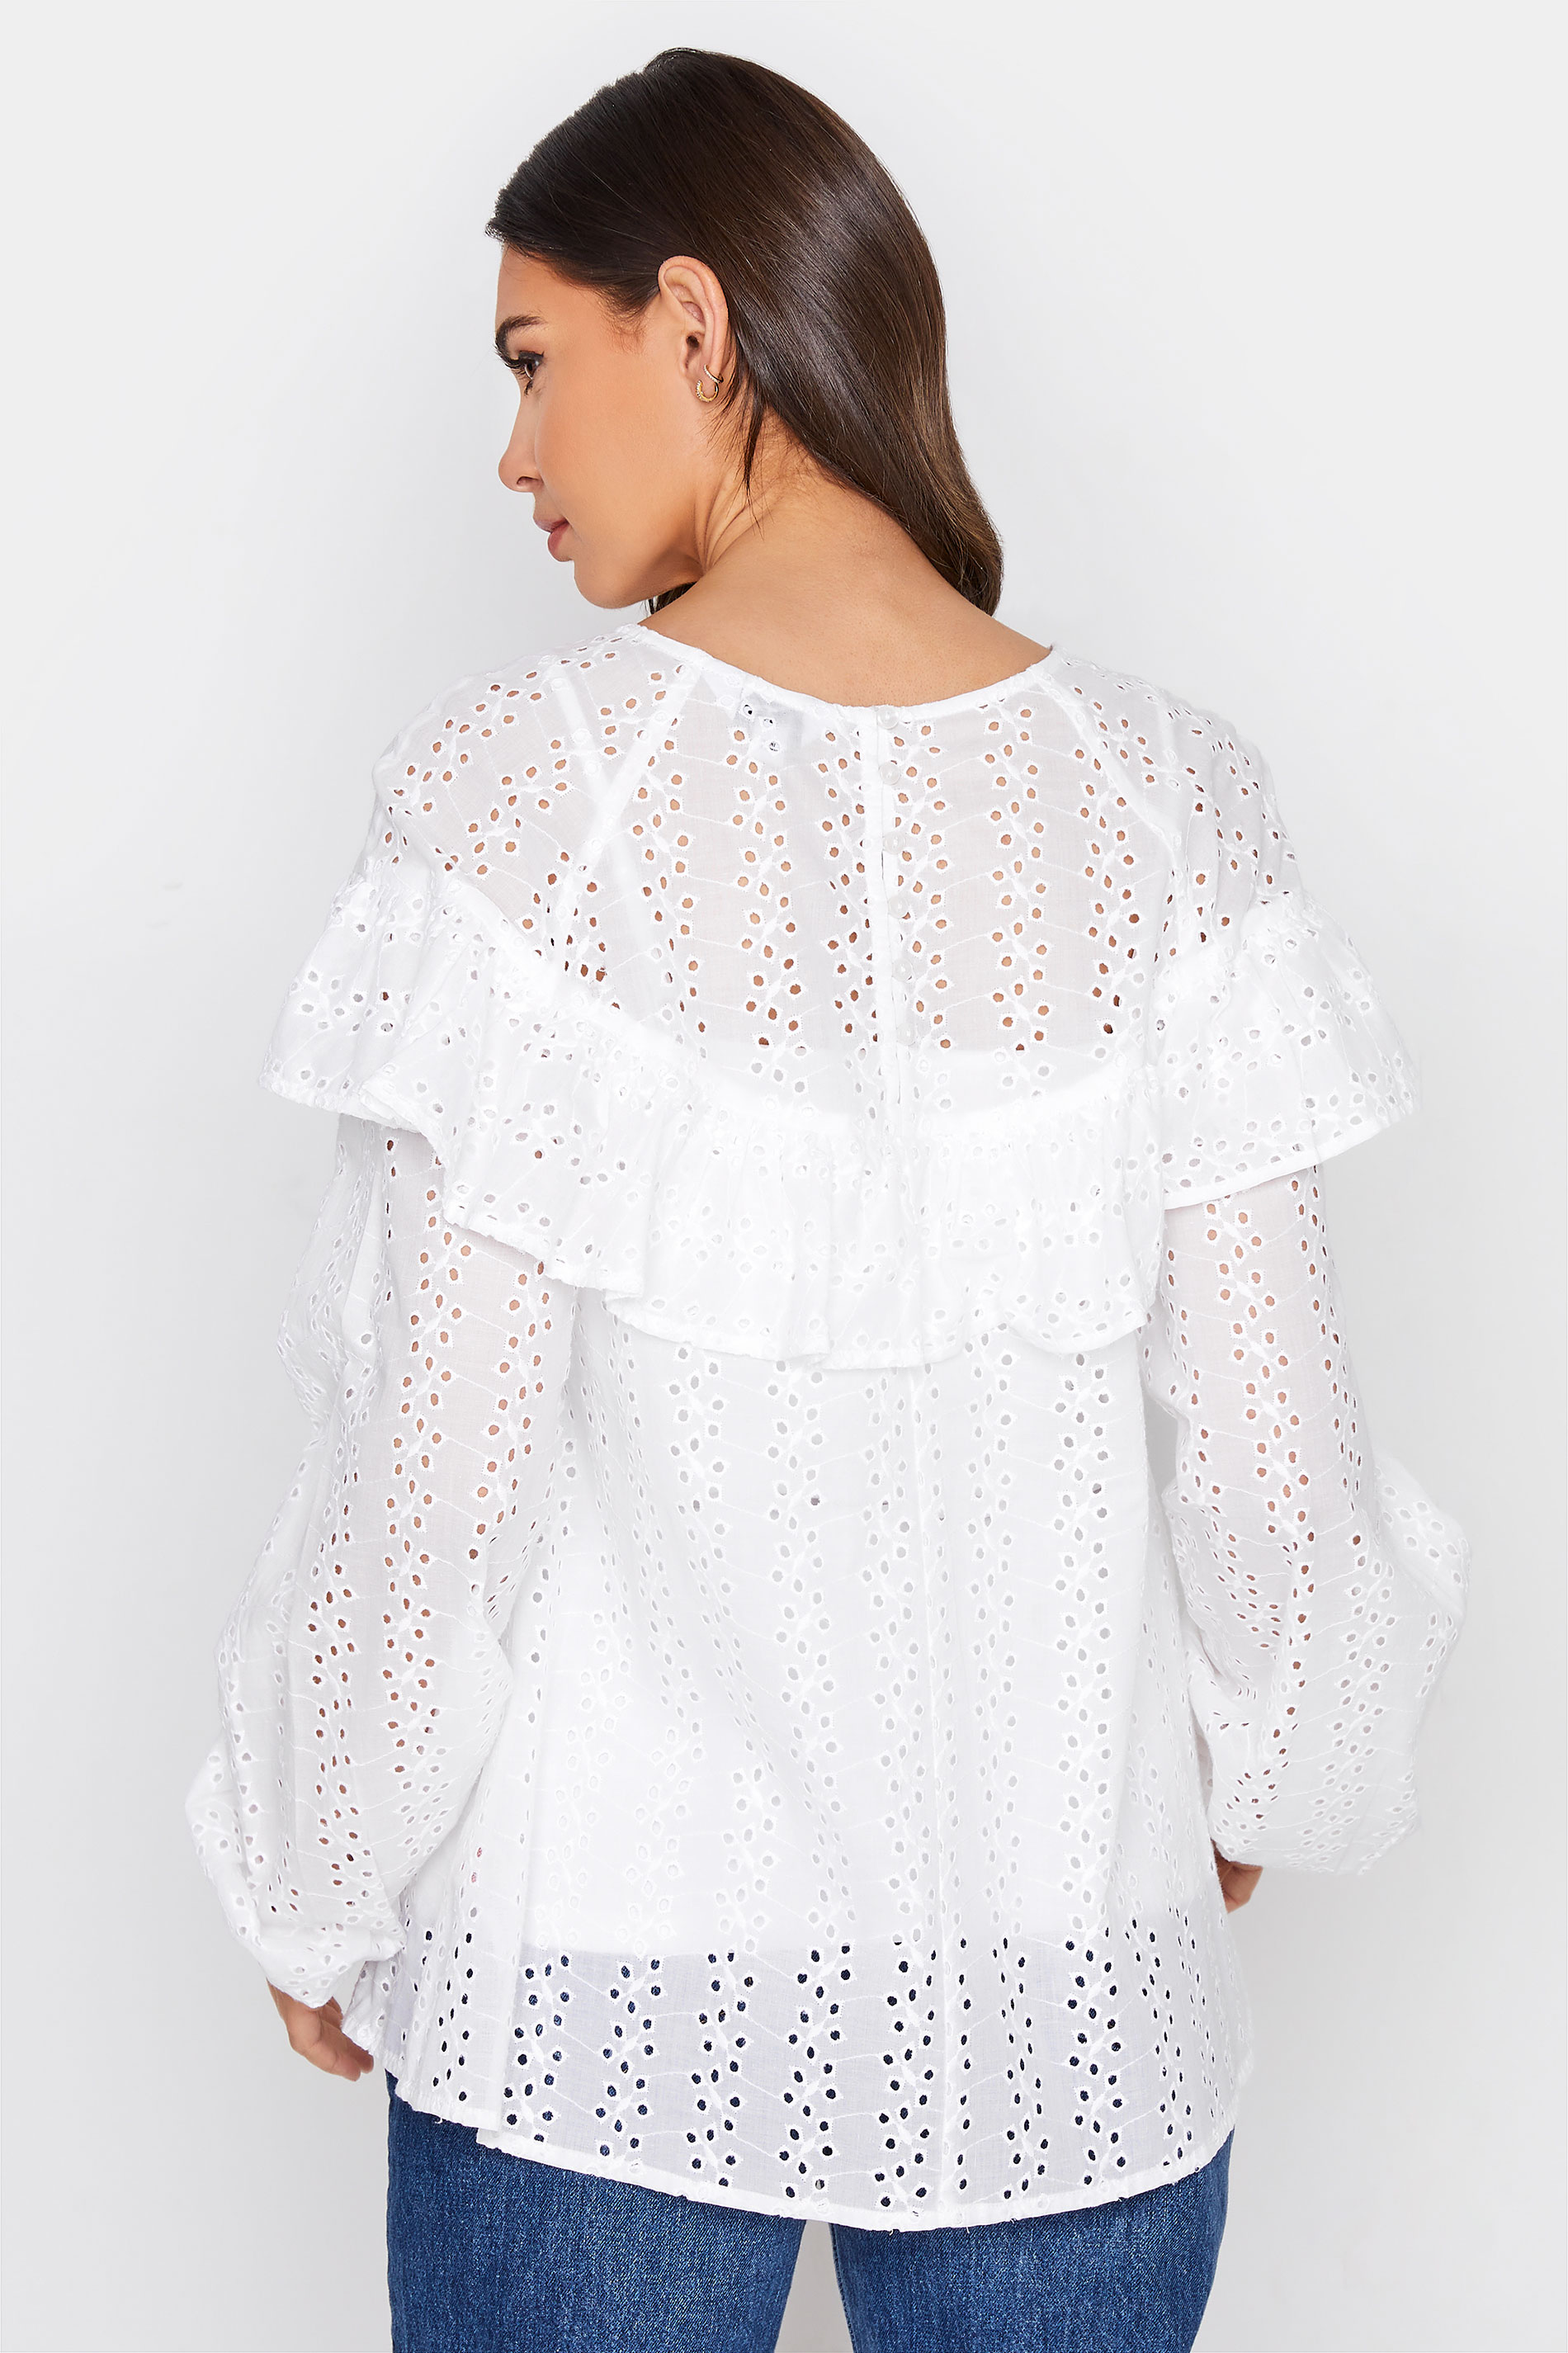 Tall Women's LTS White Broderie Anglaise Ruffle Top | Long Tall Sally 3